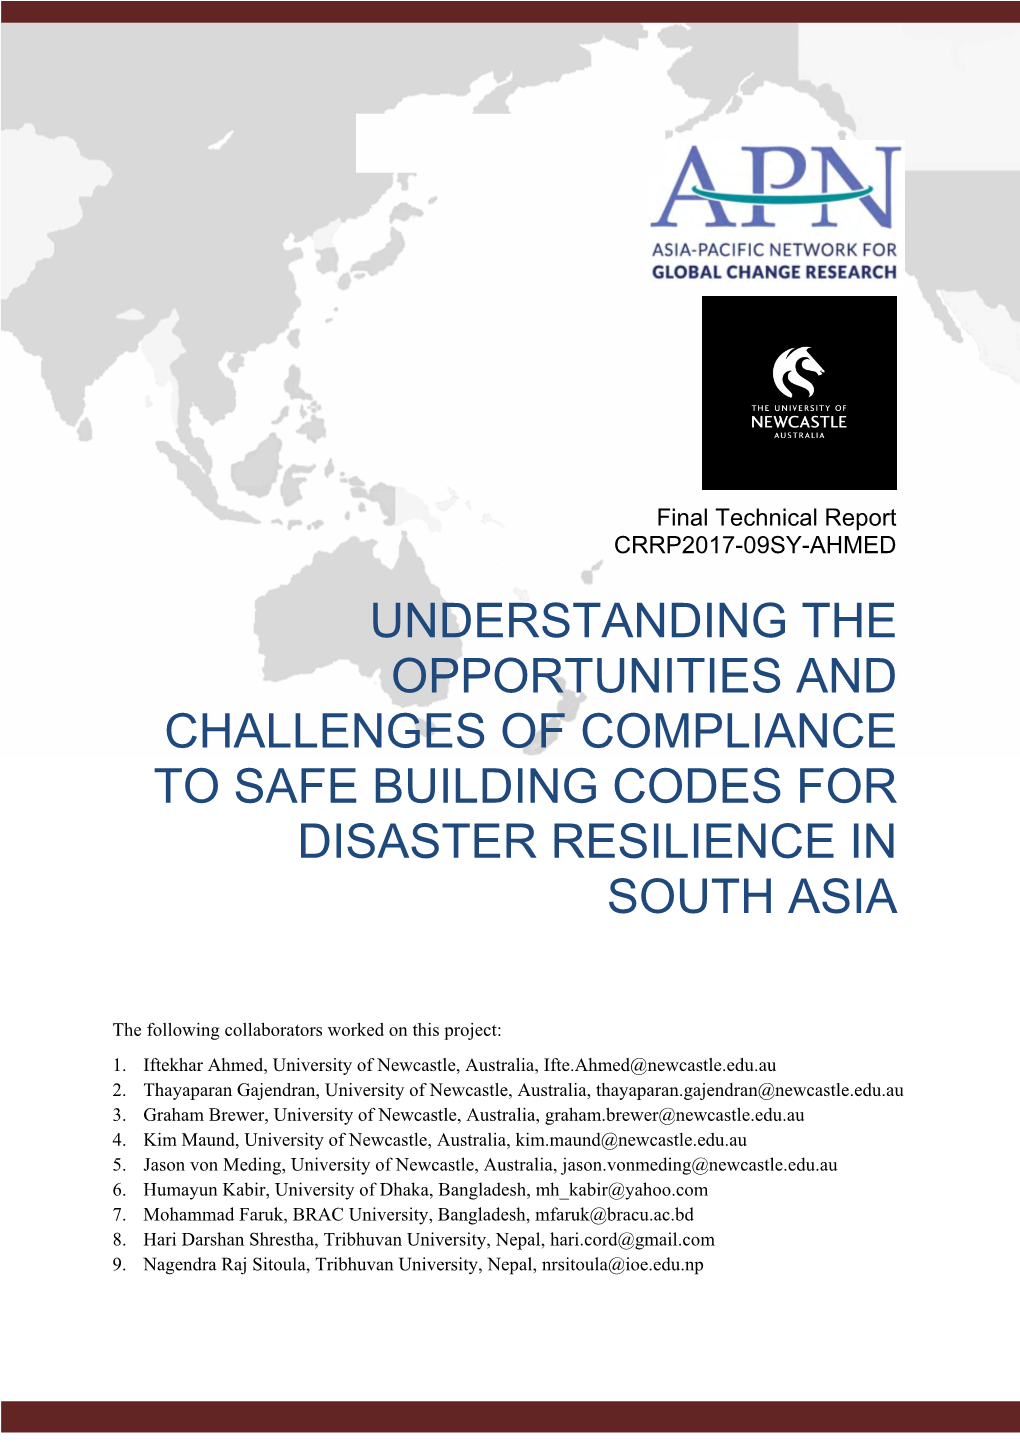 Understanding the Opportunities and Challenges of Compliance to Safe Building Codes for Disaster Resilience in South Asia